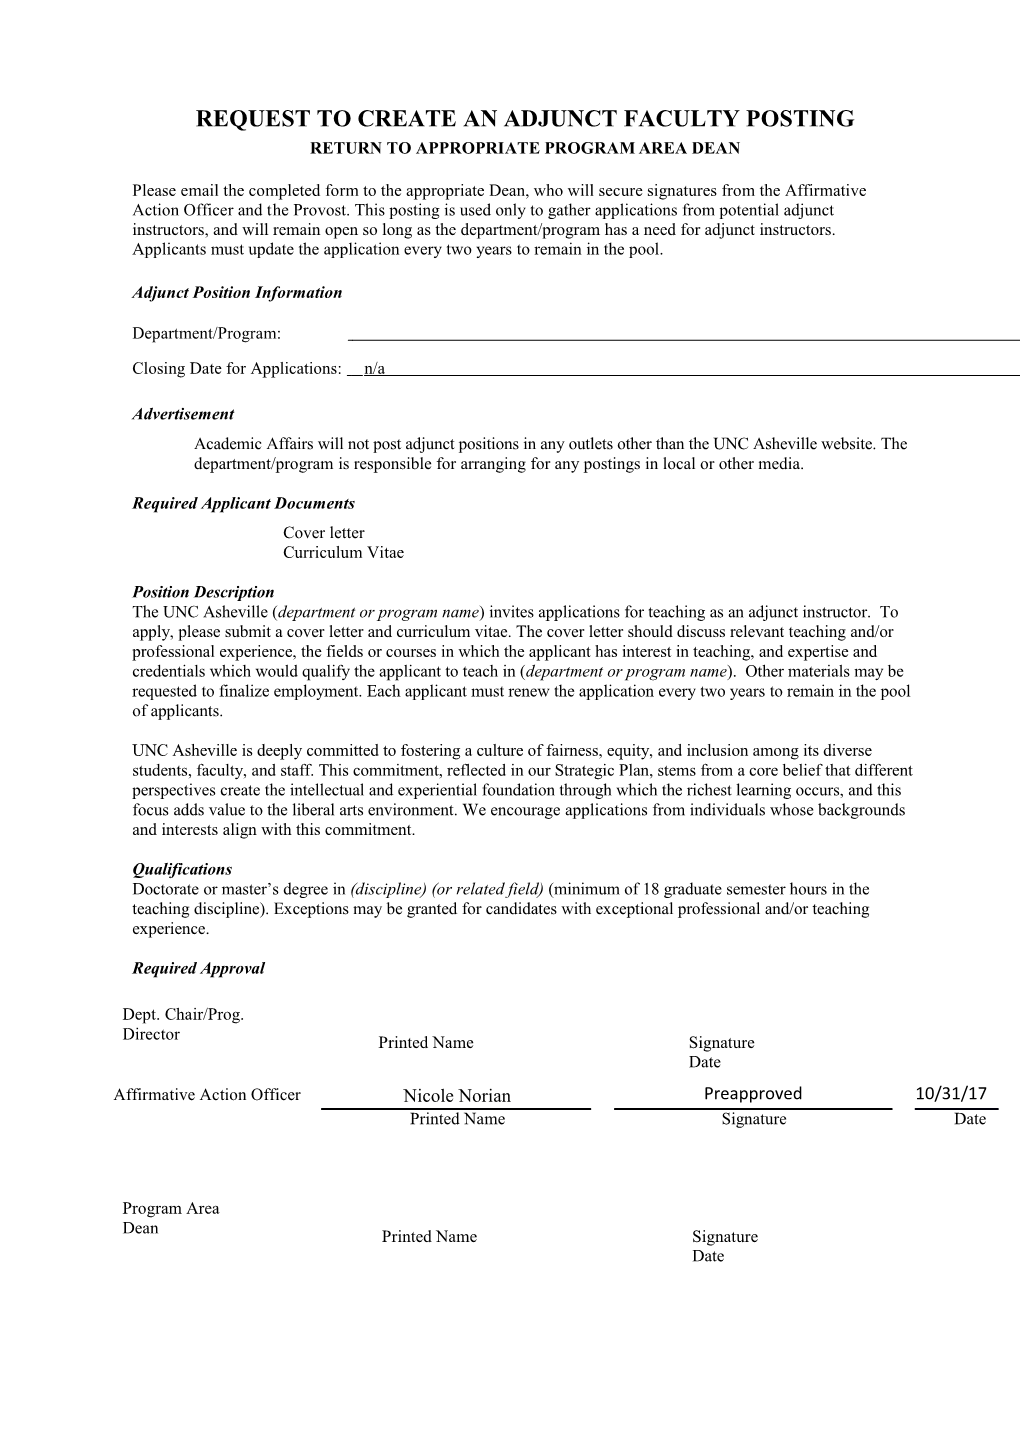 Request to Create an Adjunct Faculty Posting